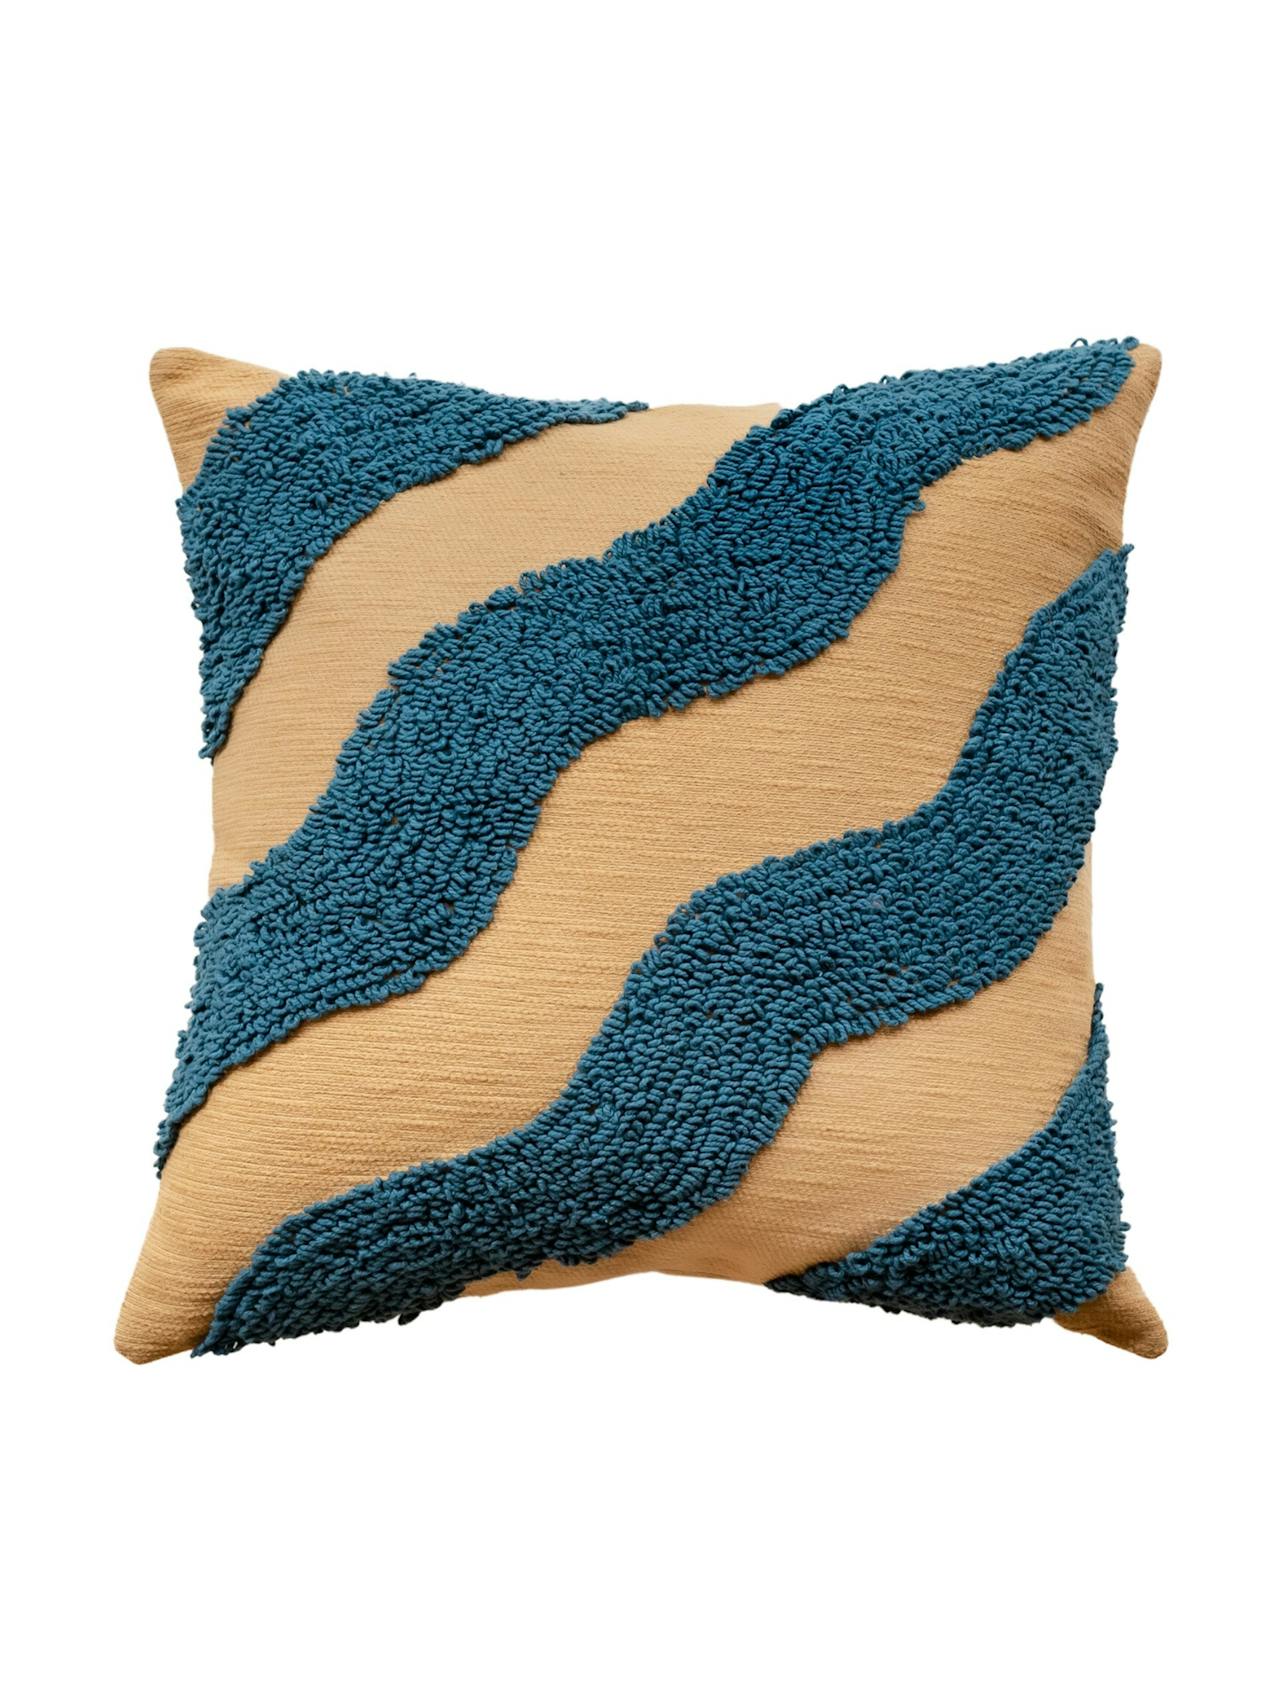 Textured stone wave cotton cushion cover